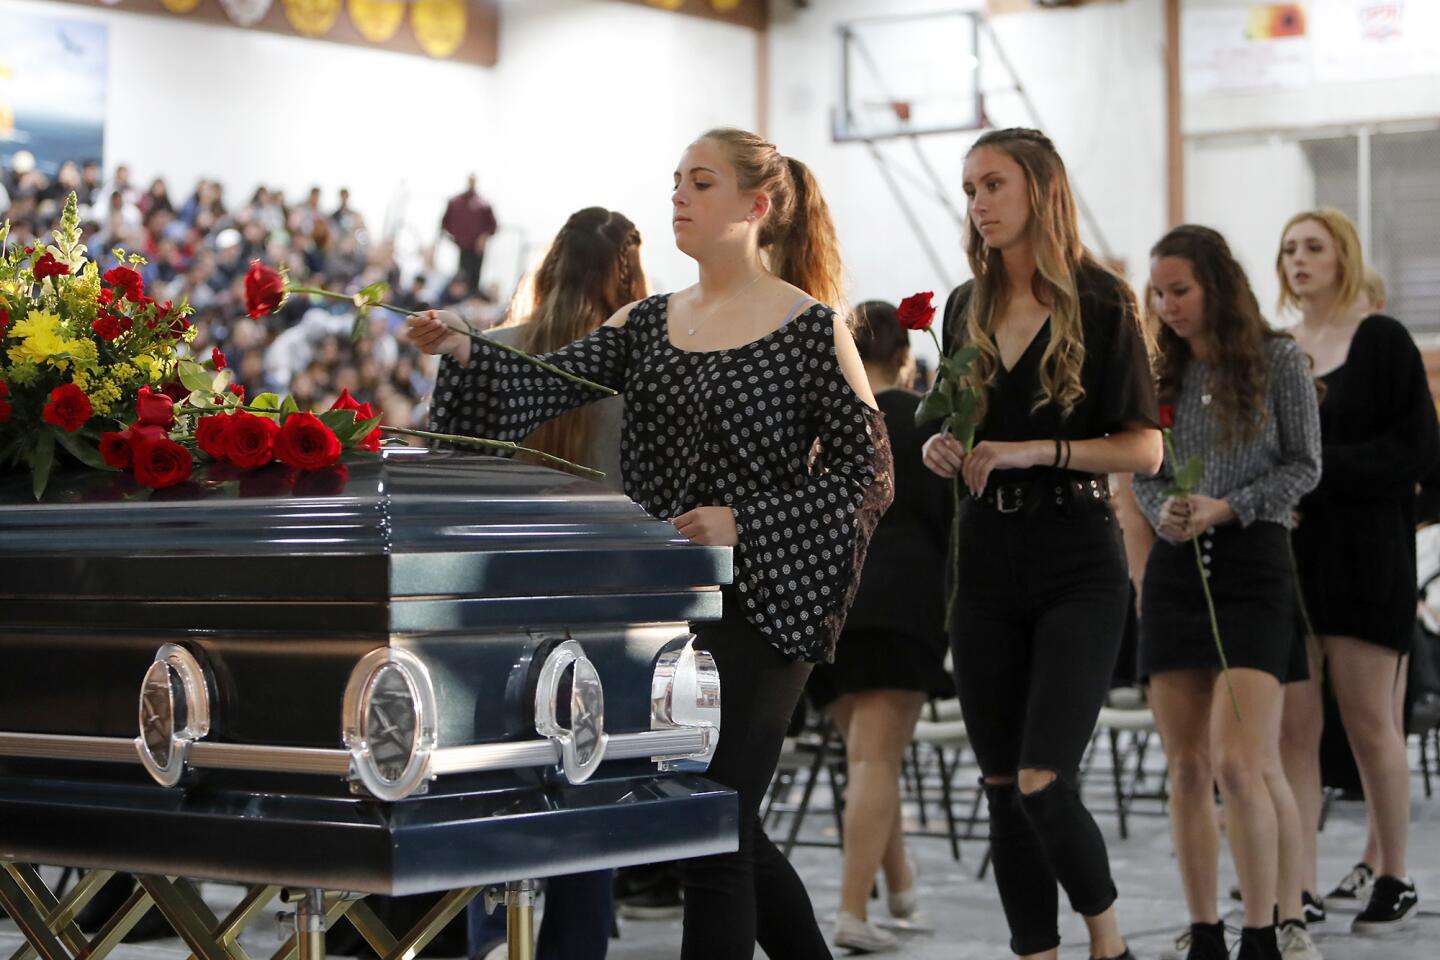 Photo Gallery: Every 15 Minutes at Ocean View High School